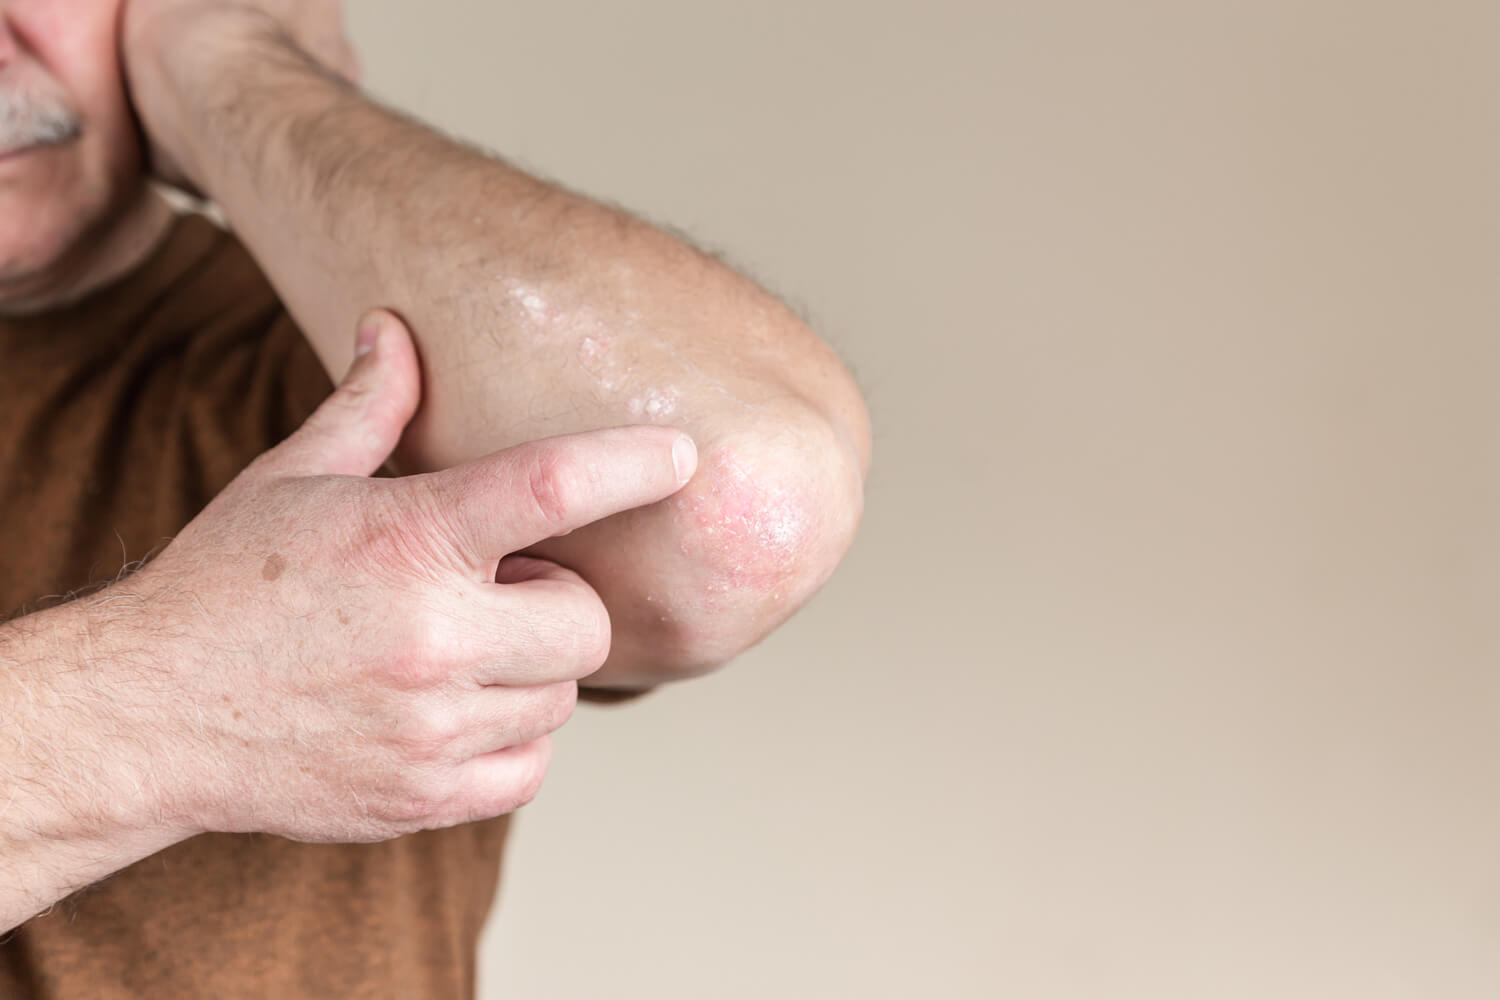 Chronic dermatitis on the elbow presents like psoriasis with flaky scales, white patches, redness, and inflammation